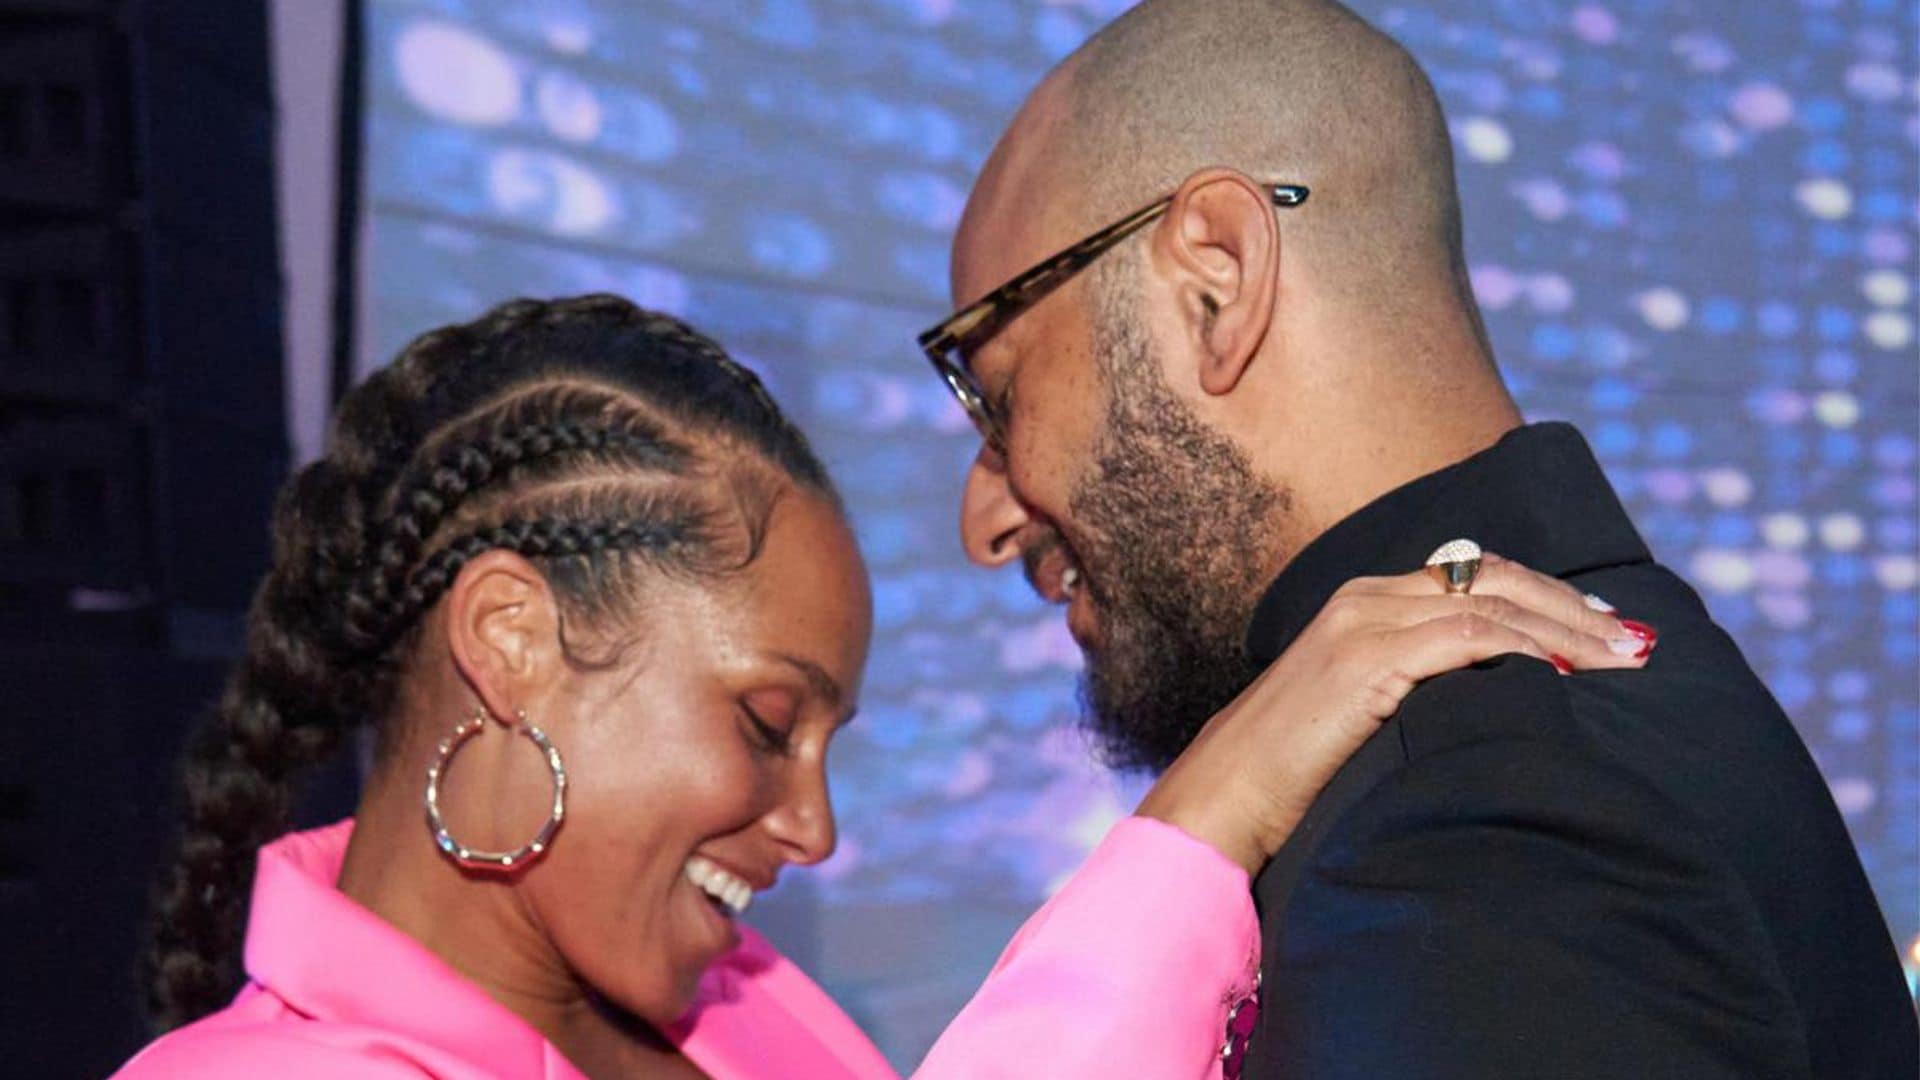 Alicia Keys and Swizz Beatz are couple goals while visiting Qatar